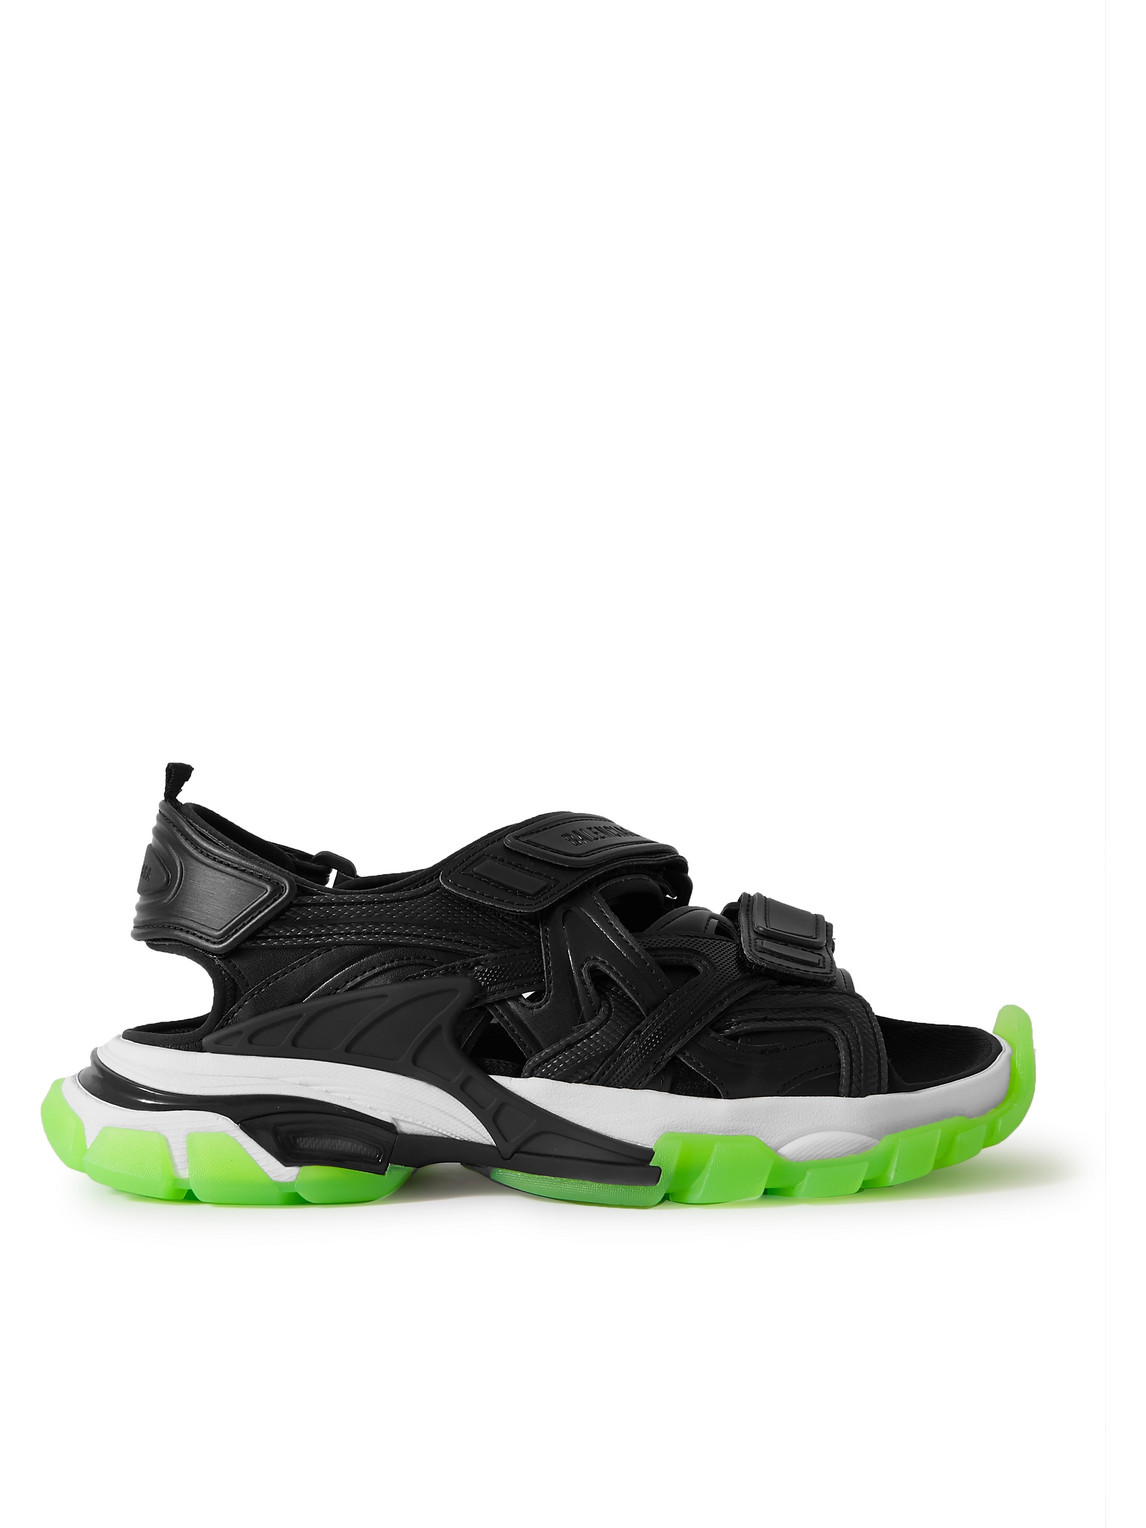 Balenciaga Neoprene And Clearsole Sandals, Brand 41 (us Size 8) In Noir/green | ModeSens